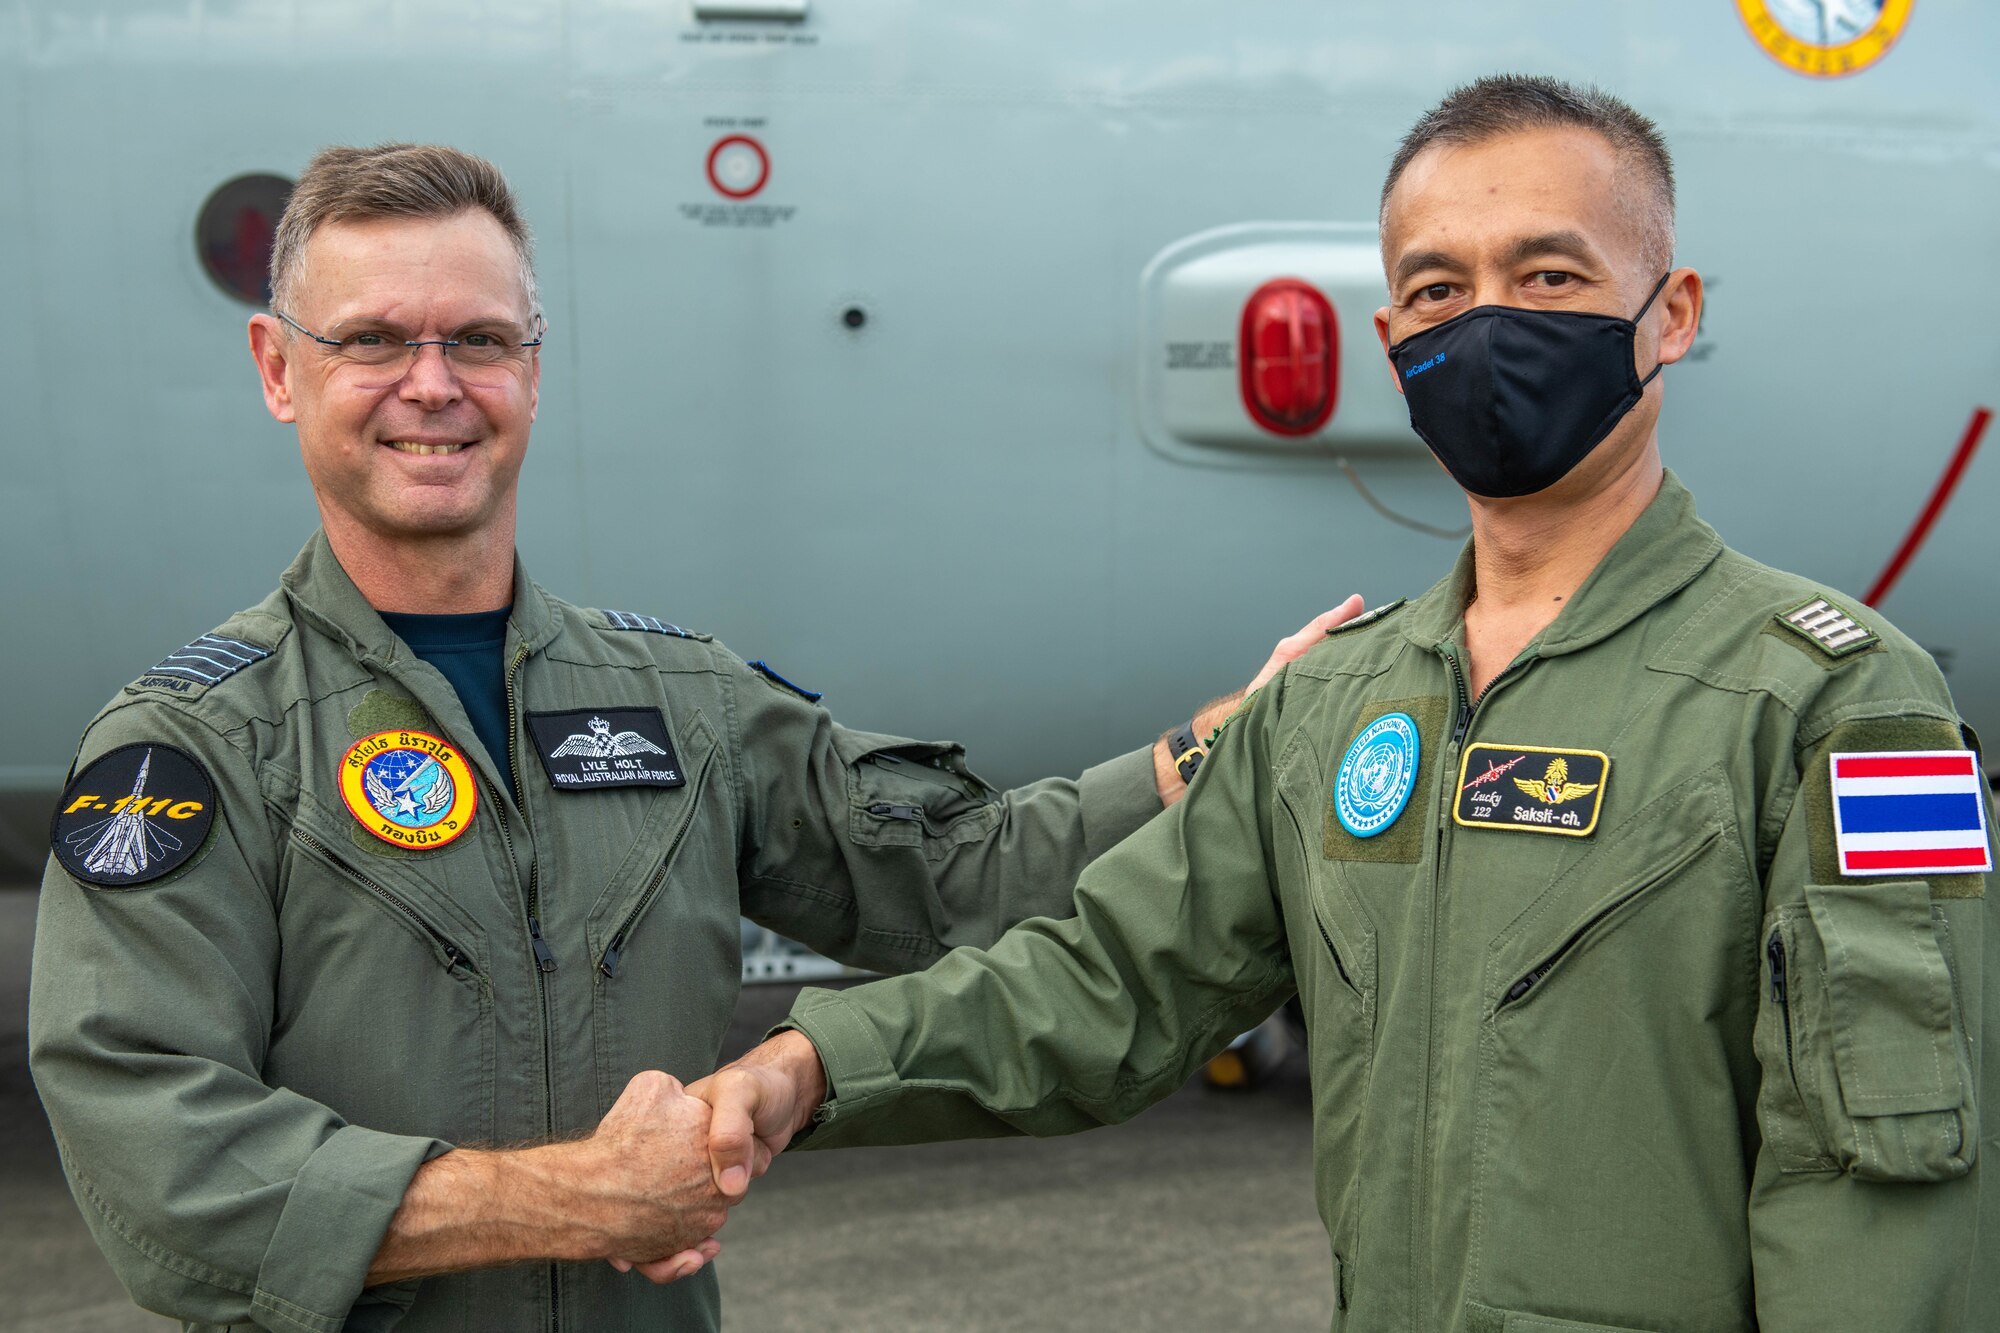 Representatives from UNC-R and RTAF shake hands